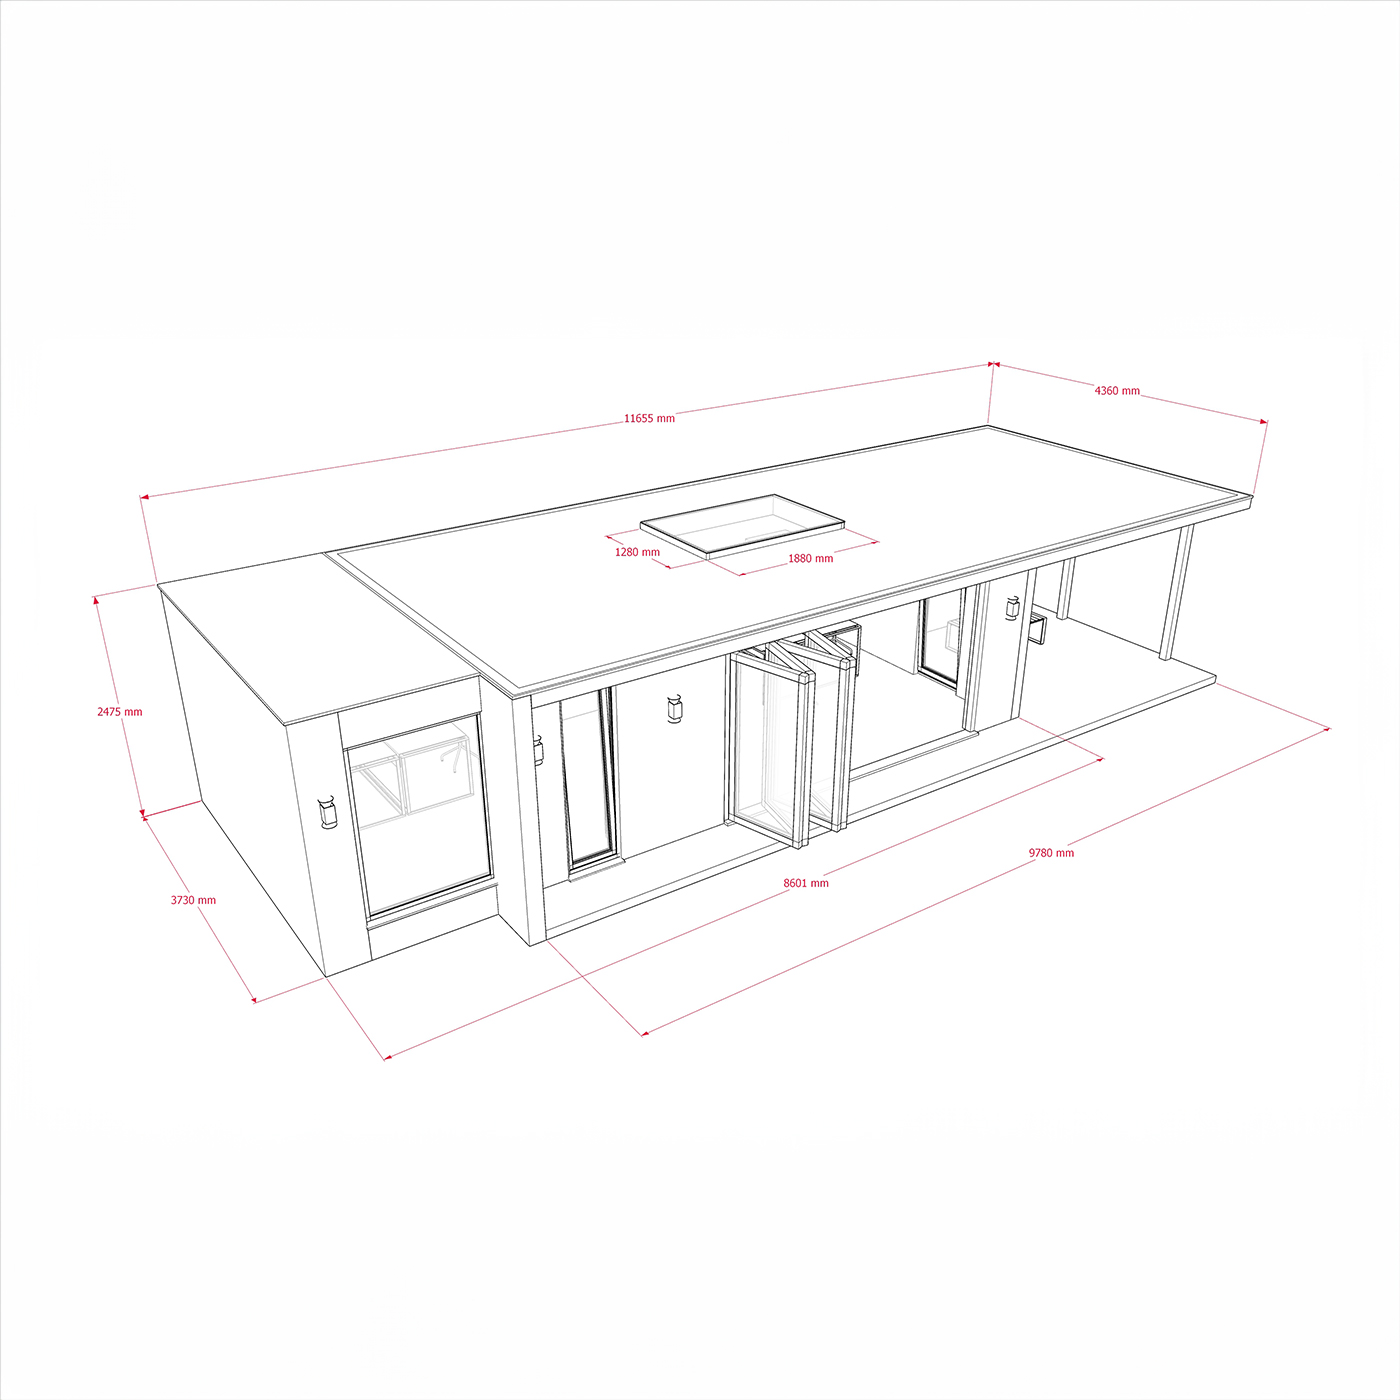 Exterior dimensions for 3.6m by 8.6m garden office